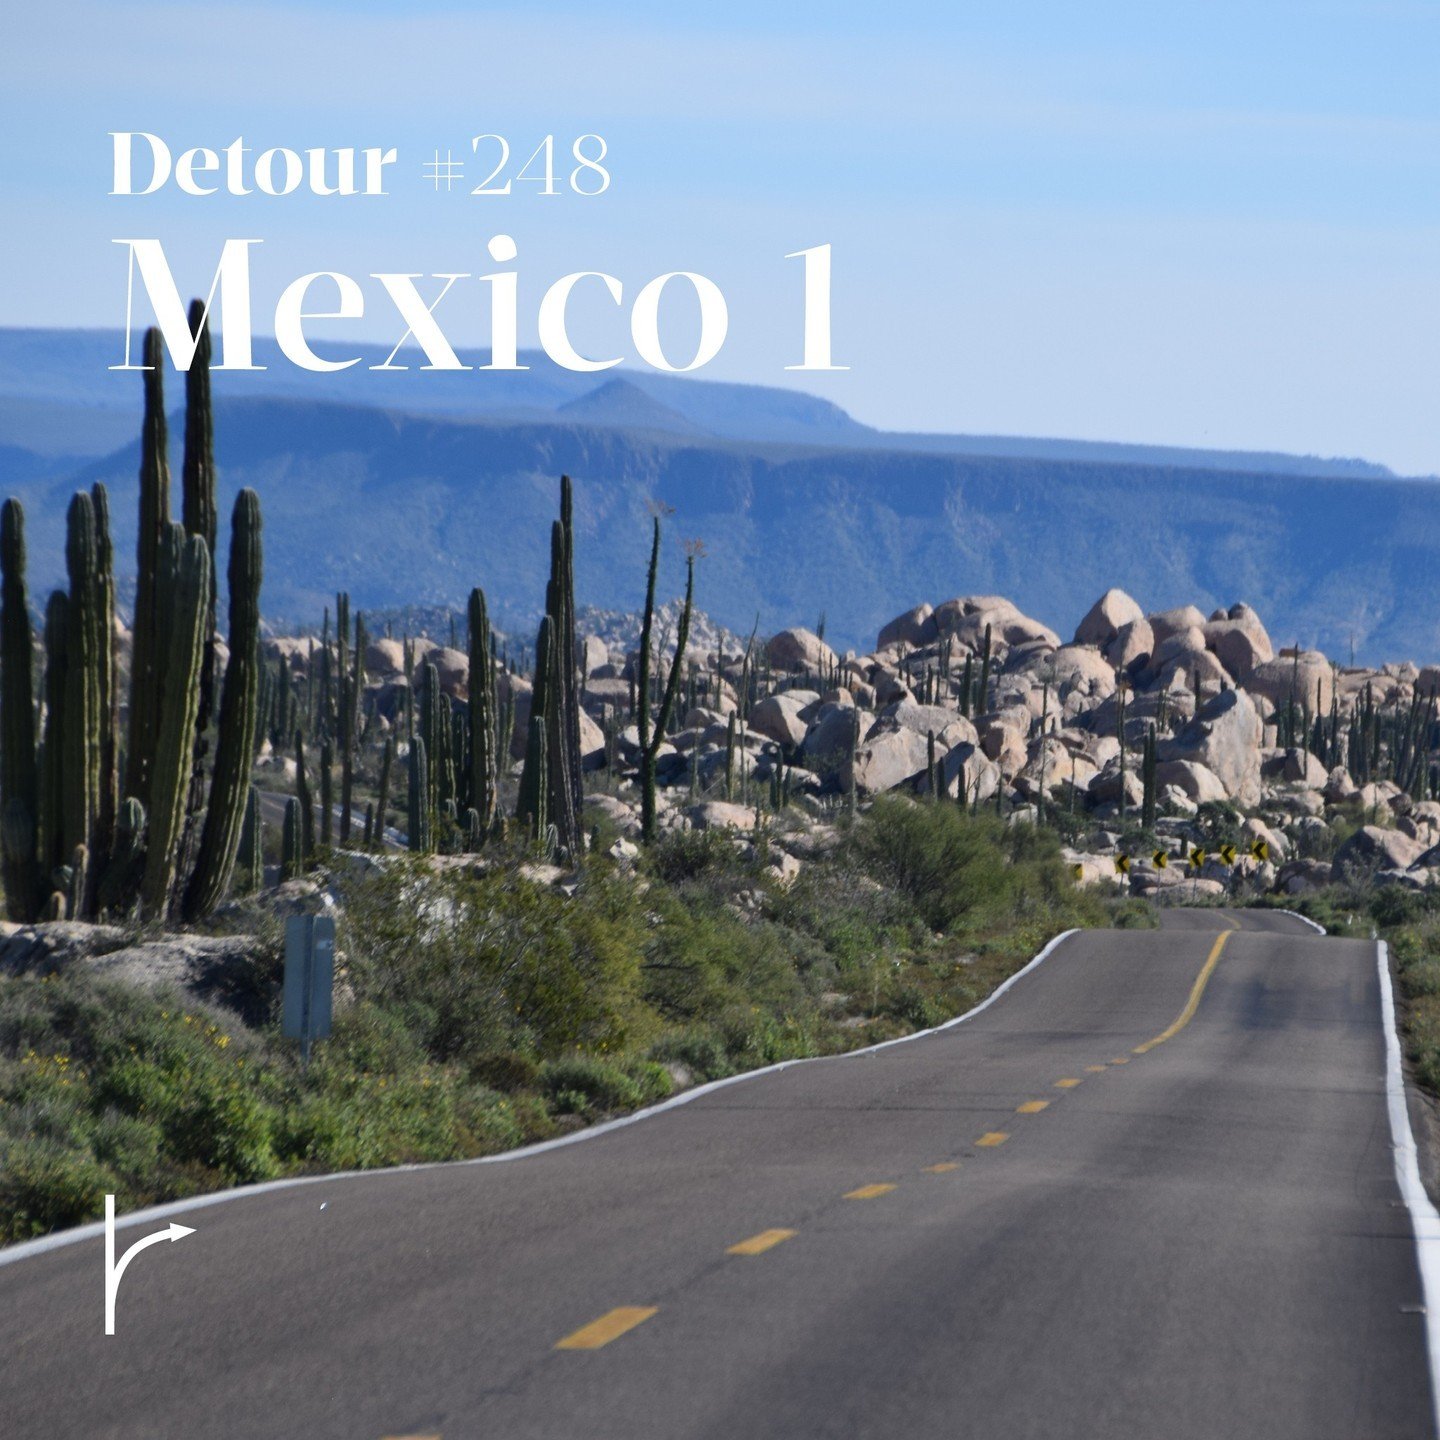 Tracing both the Pacific and Sea of Cortez coasts and crossing majestic mountains, Mexico 1 runs the length of the Baja peninsula and is one of THE greatest road trips in the Americas.⁠
⁠
&quot;It feature long, arrow-straight stretches with distant v